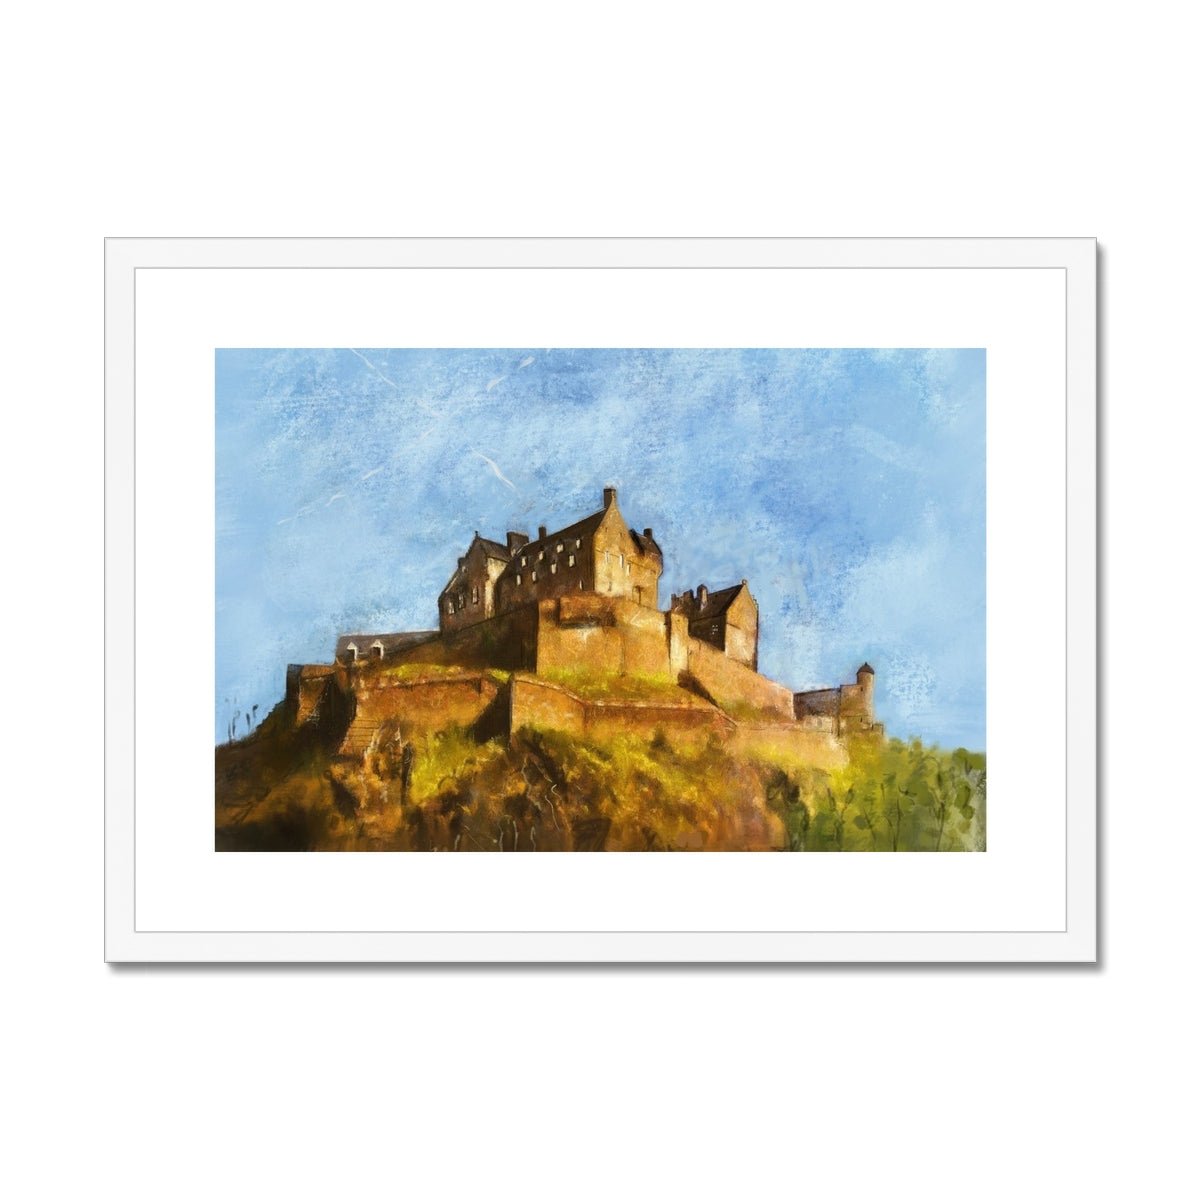 Edinburgh Castle Painting | Framed & Mounted Prints From Scotland-Framed & Mounted Prints-Historic & Iconic Scotland Art Gallery-A2 Landscape-White Frame-Paintings, Prints, Homeware, Art Gifts From Scotland By Scottish Artist Kevin Hunter